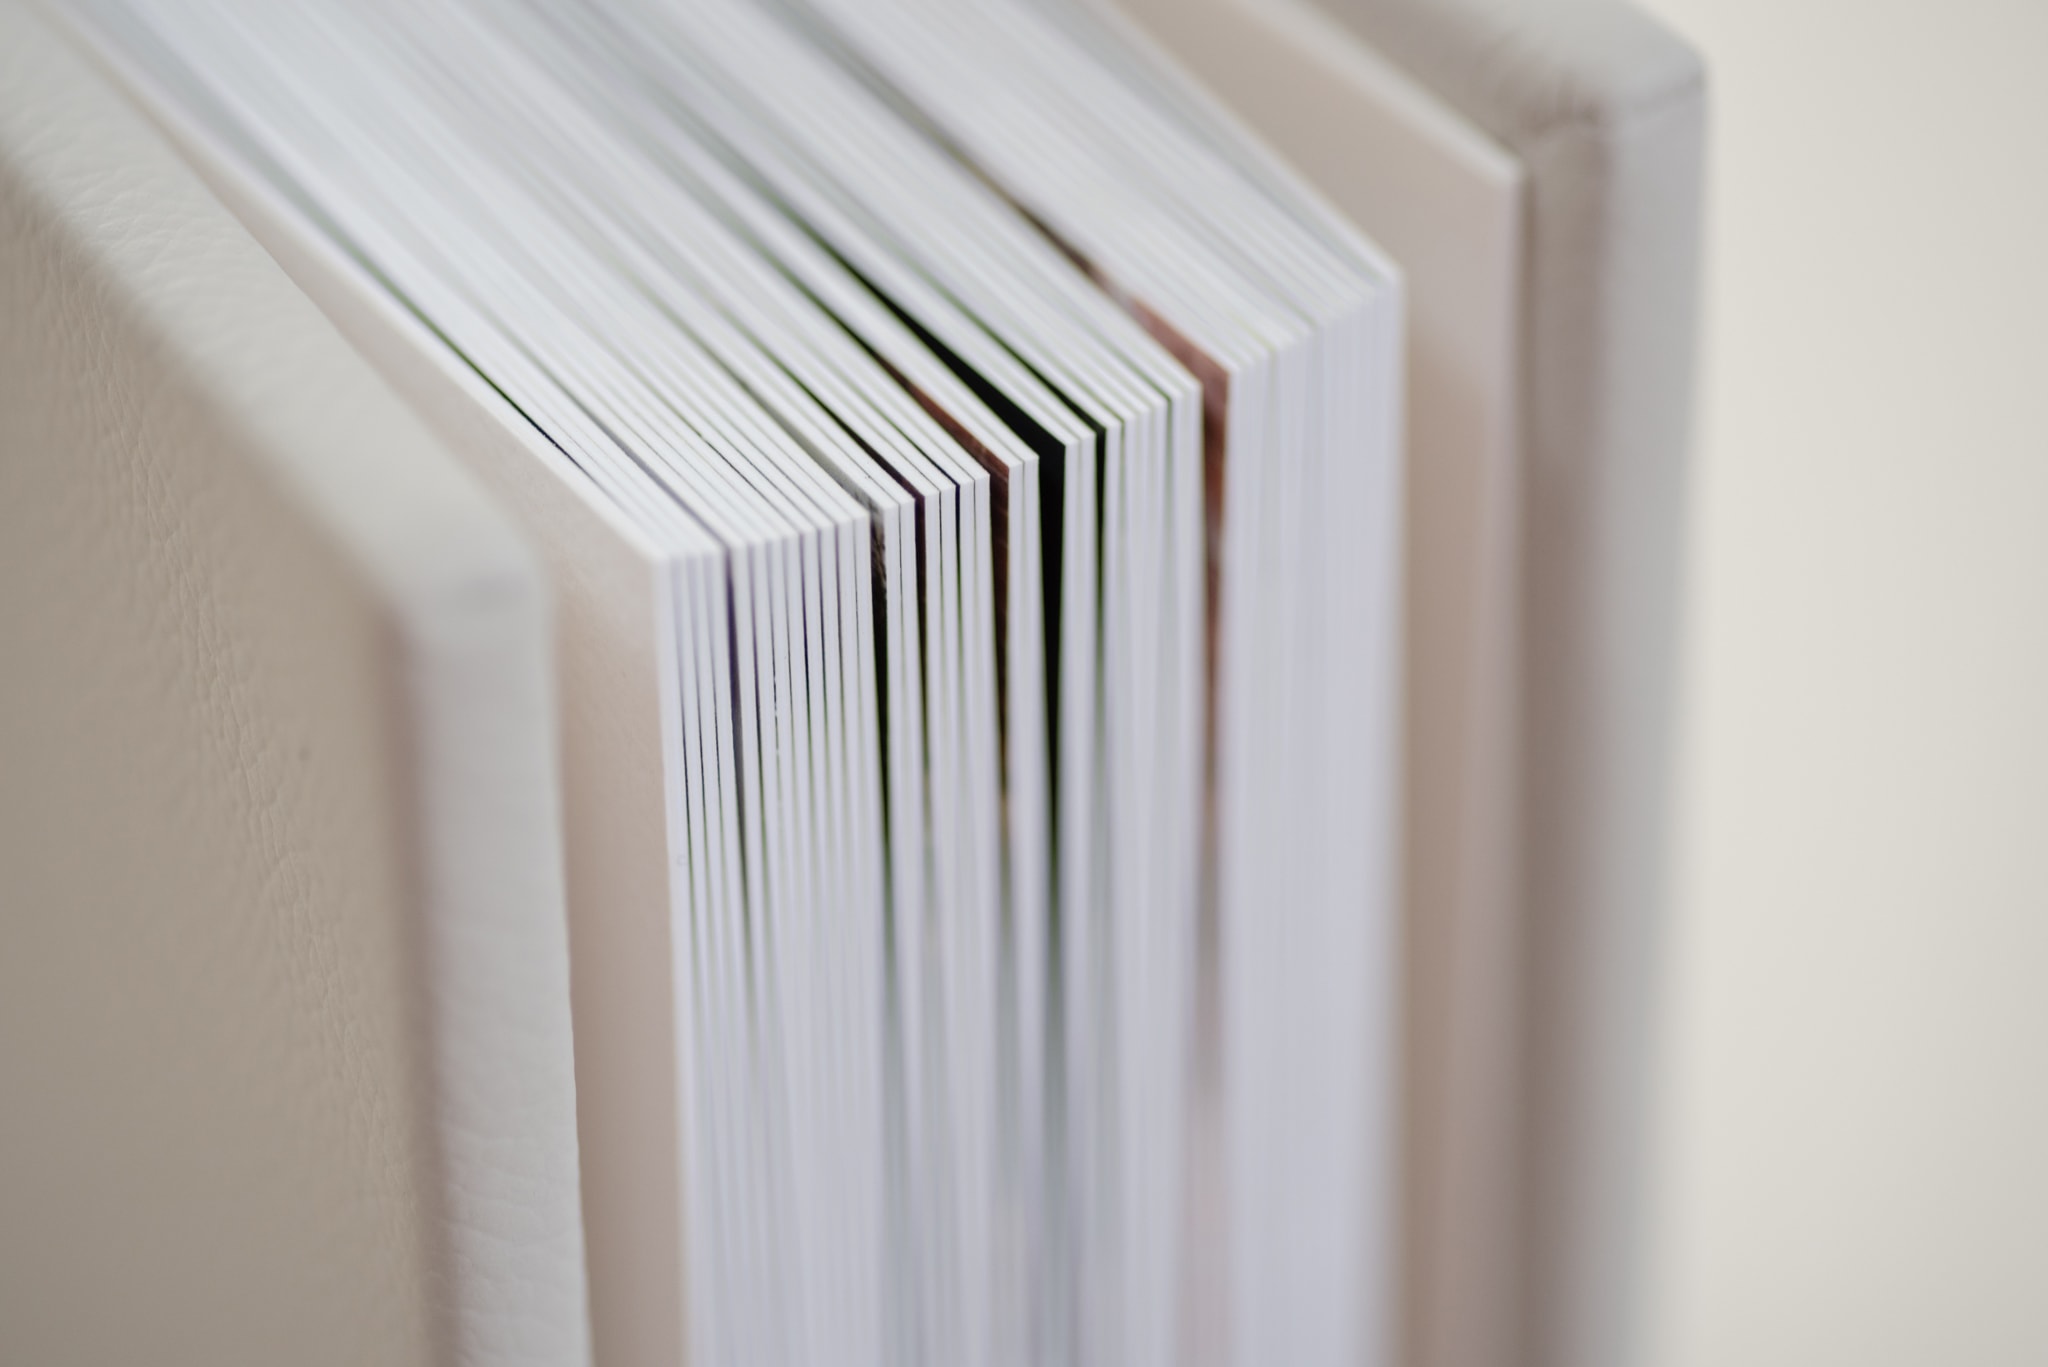 Close up detail showing the thickness of the pages in a fine art wedding album